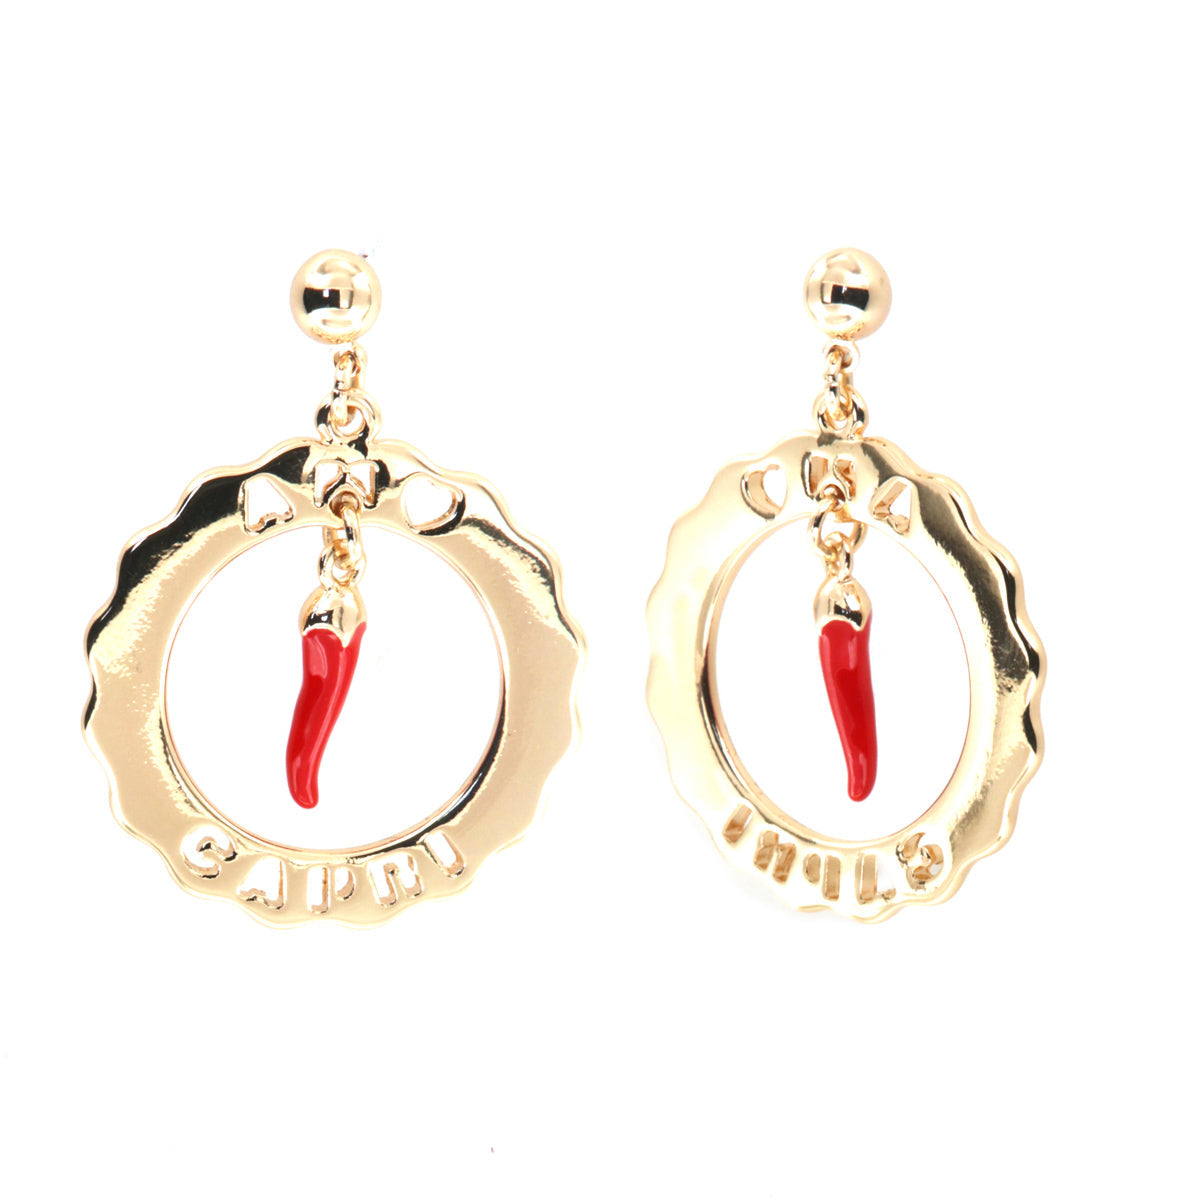 Metal earrings in circle with horn in pendant red enamel and writing I love